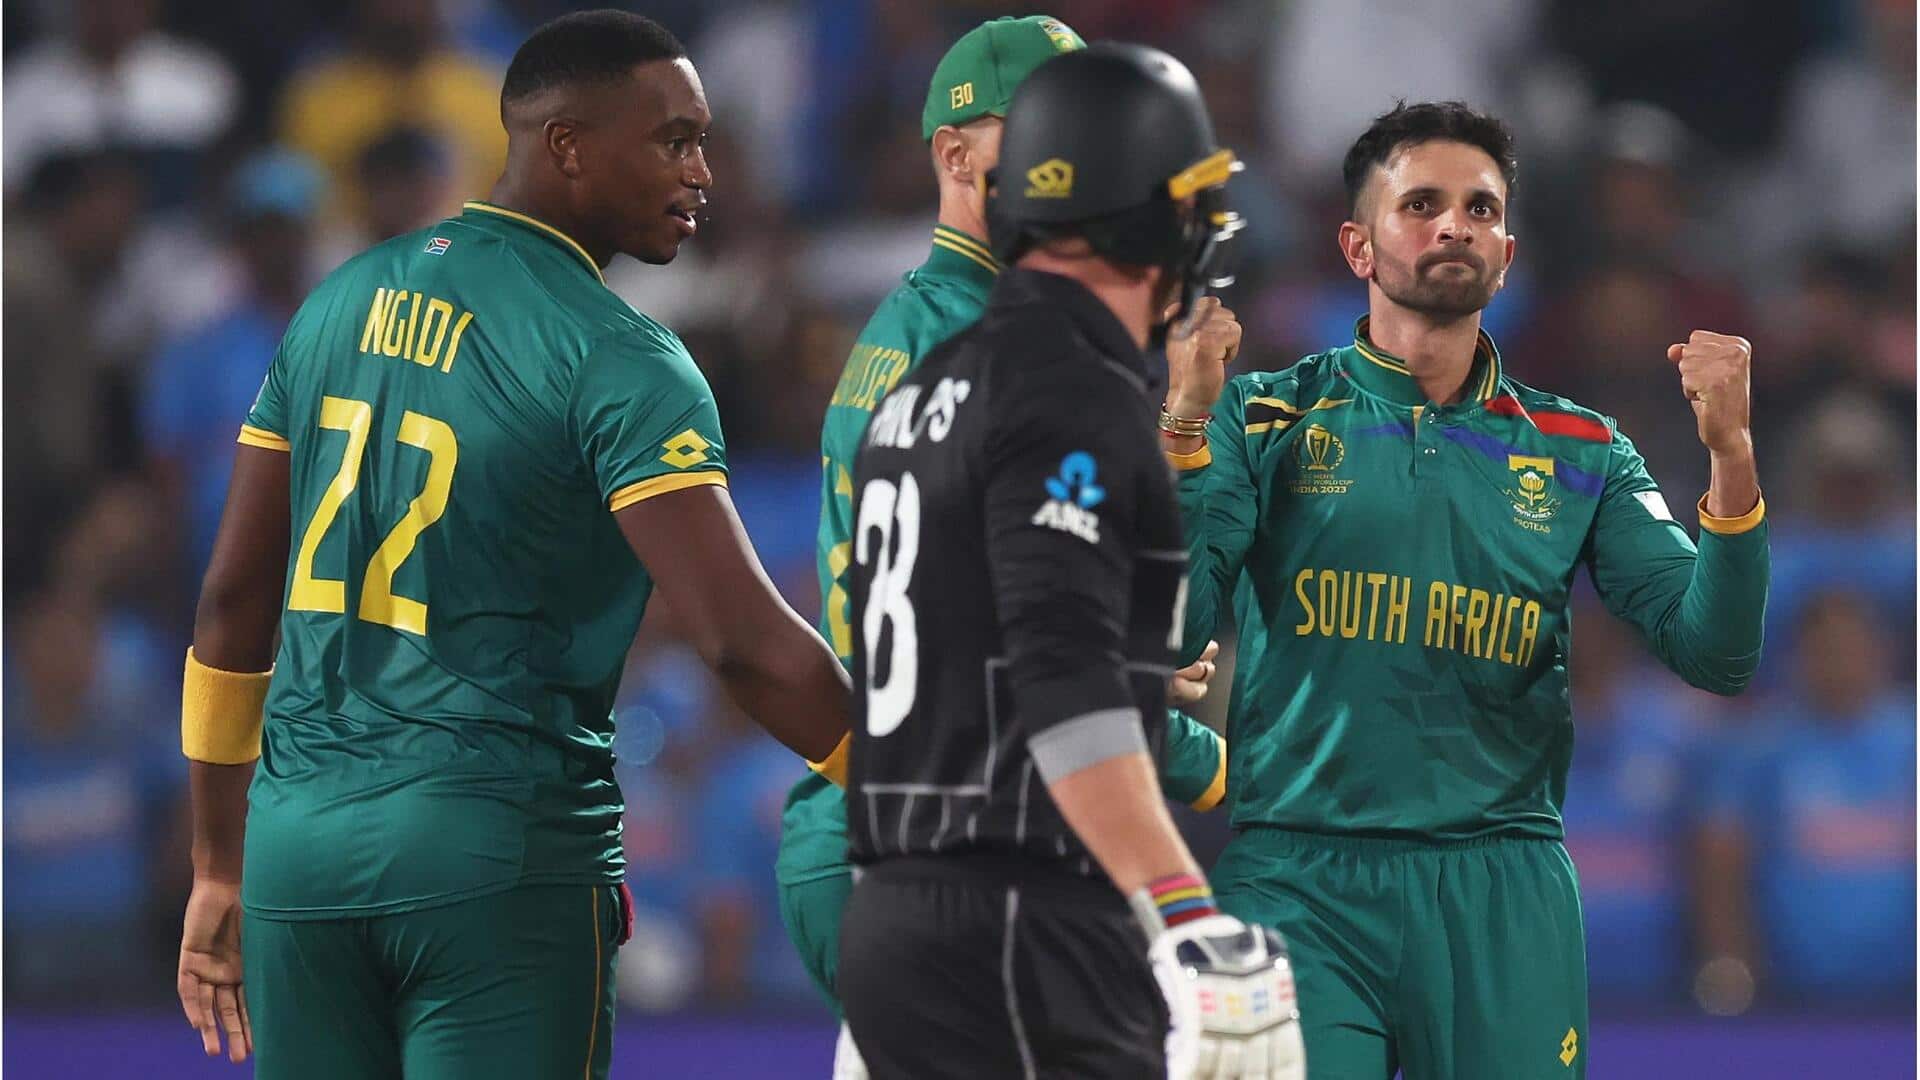 SA claim their first WC win over NZ since 1999